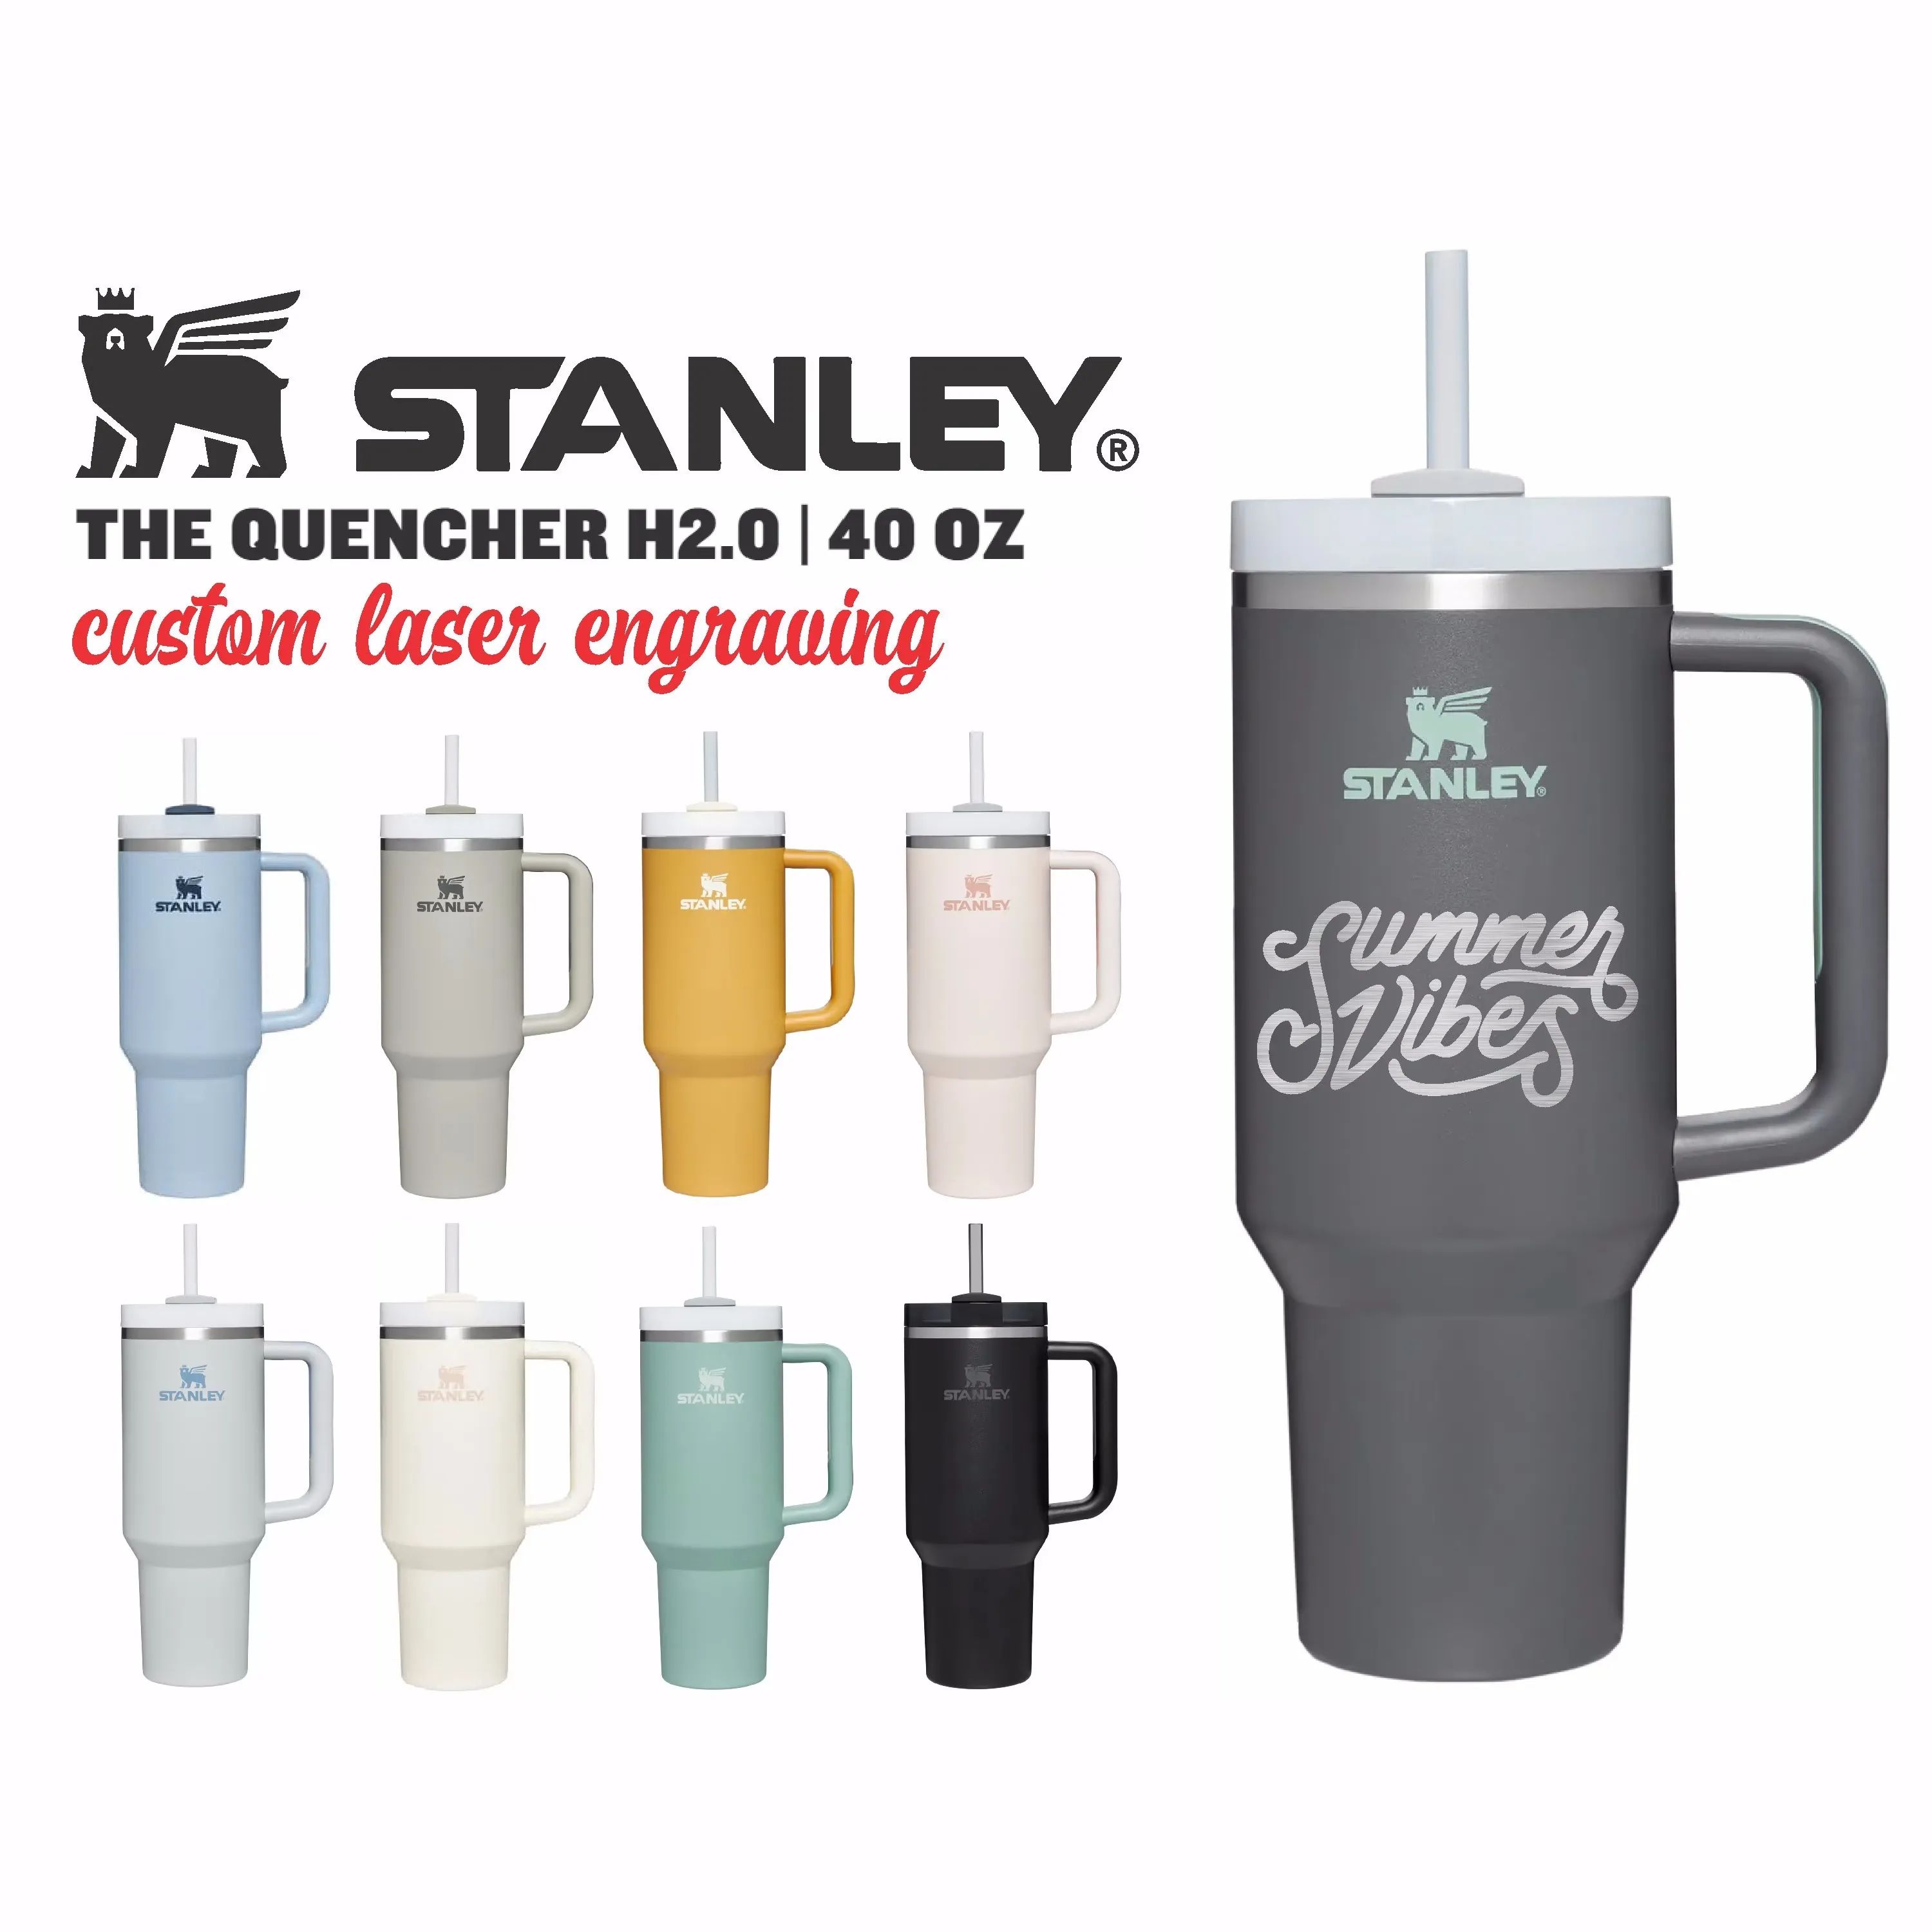 

With Logo Stanley 40oz Mug Tumbler With Handle Insulated Tumblers Lids Straw Stainless Steel Coffee Termos Cup j;lk 40oz Second generation, Multi-color